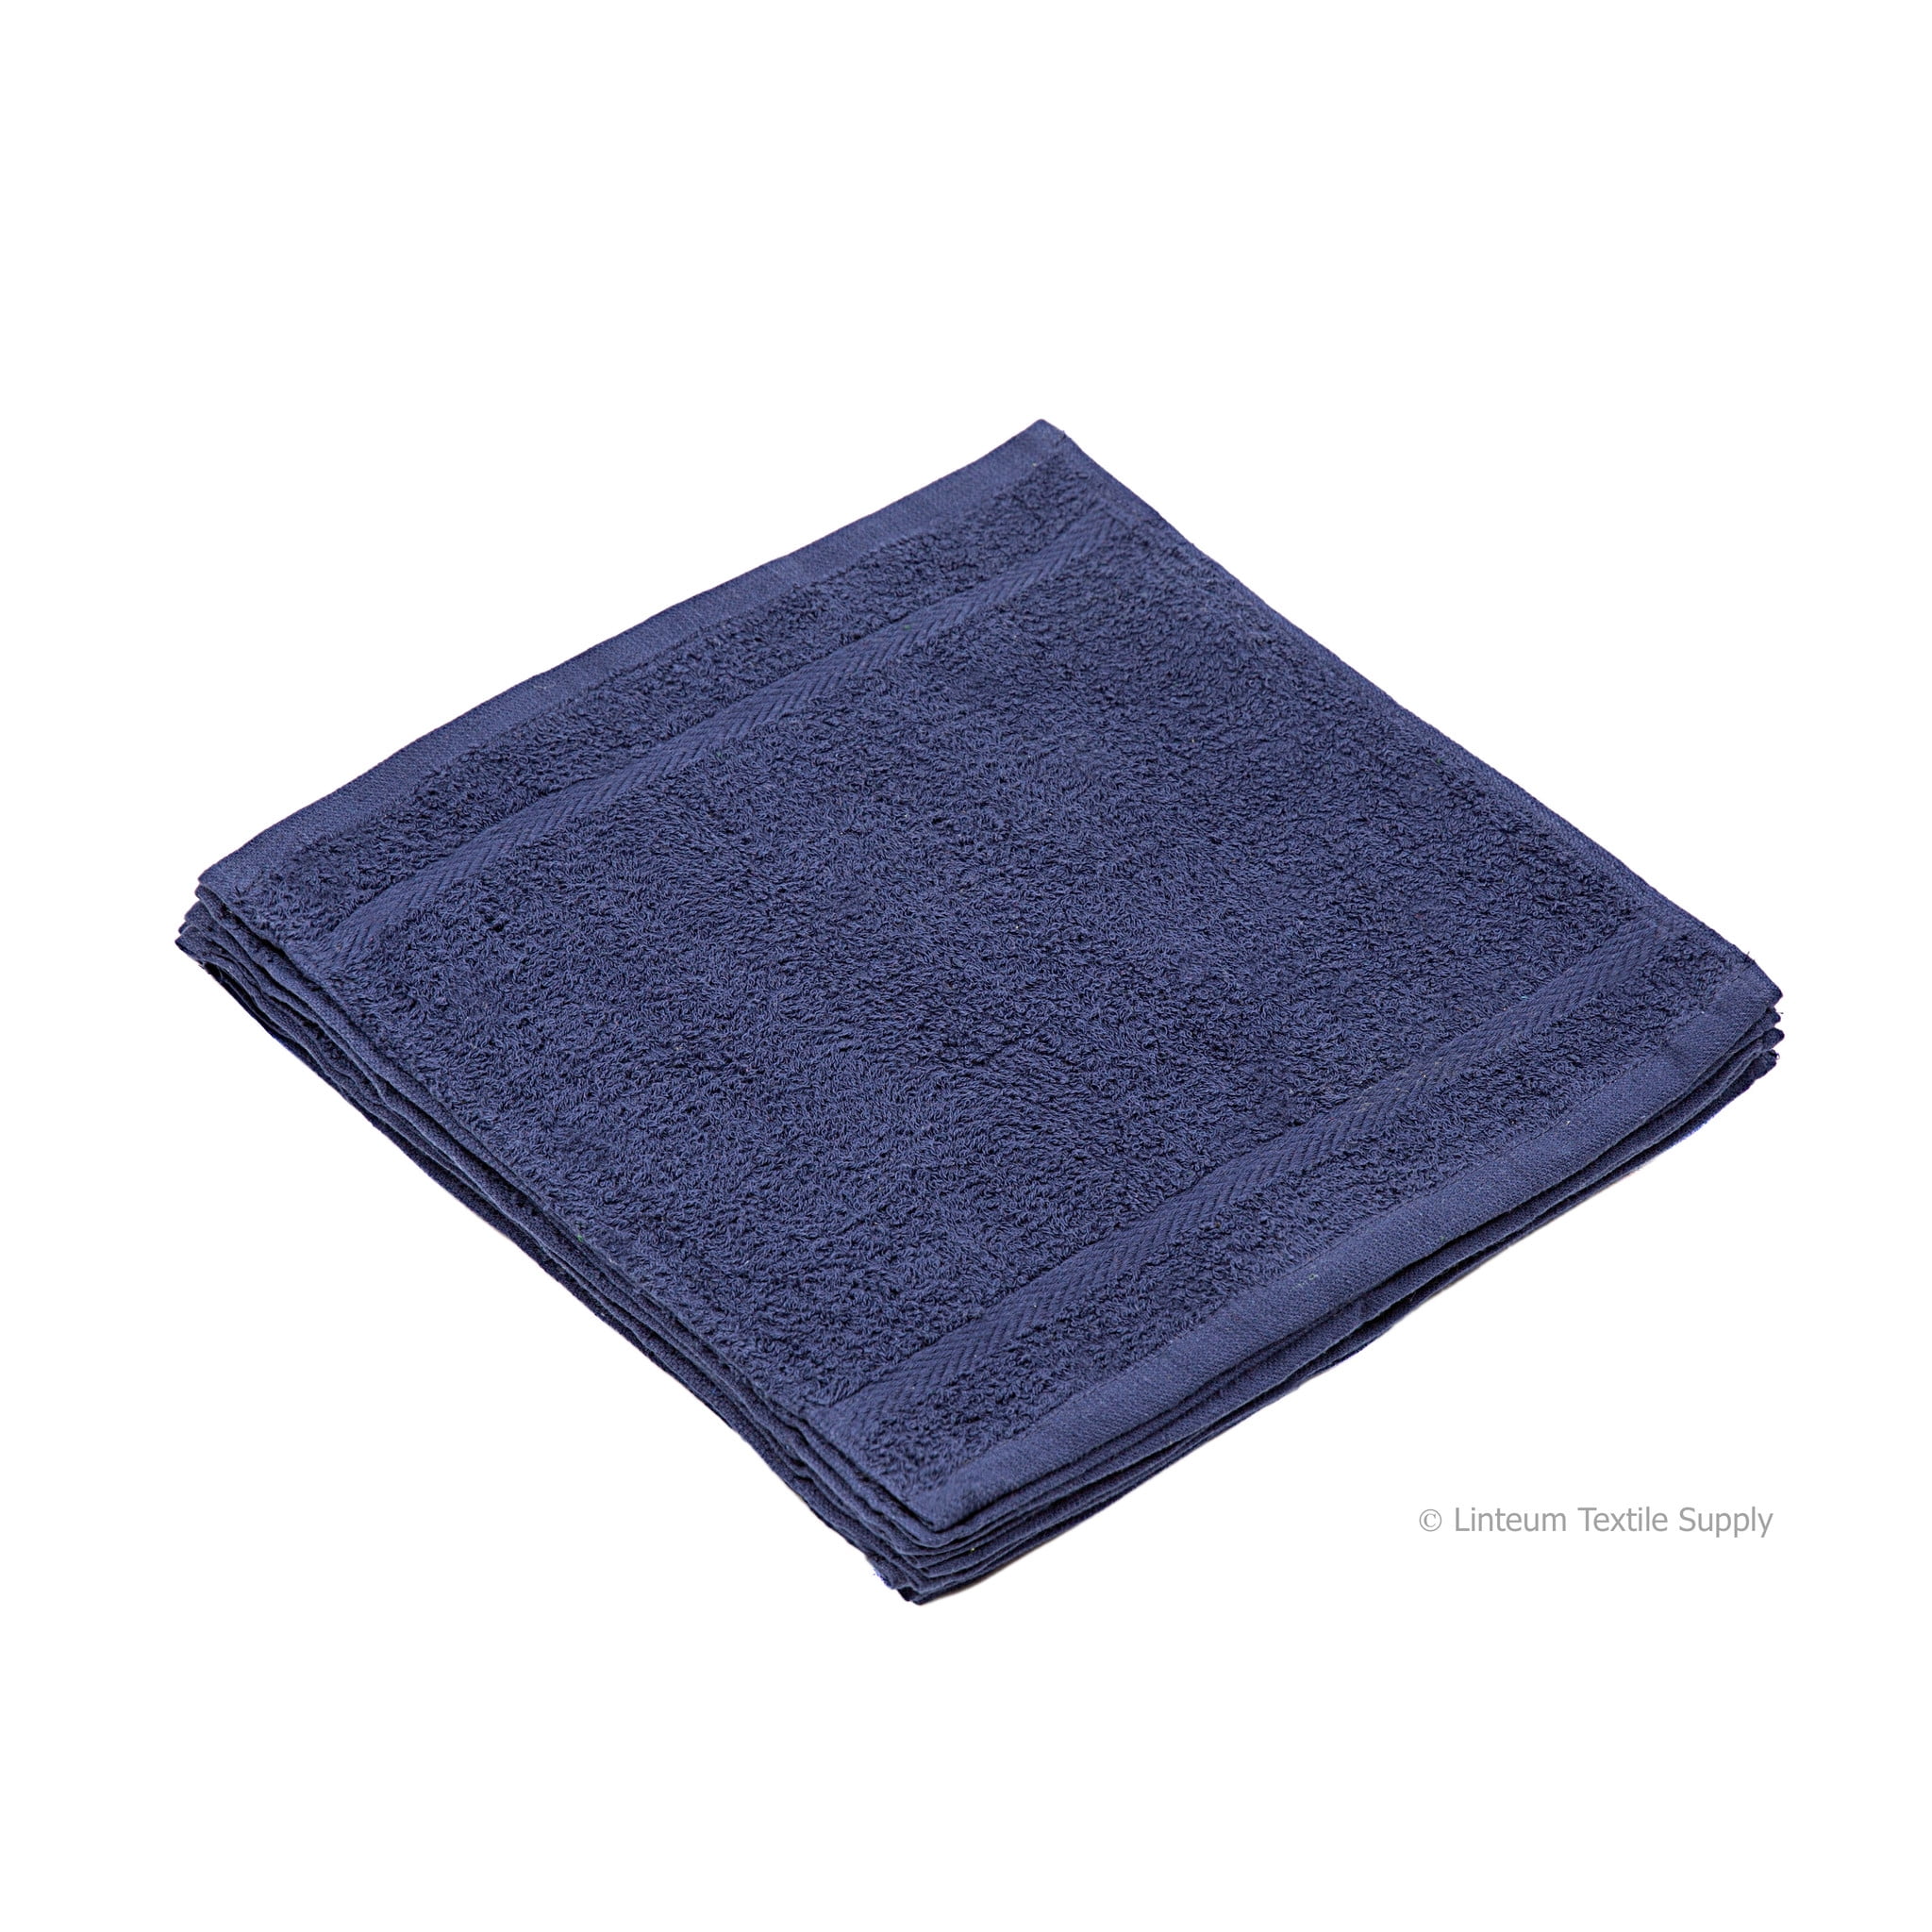 Wash Clothes 12 pack-Navy Blue (New)  Basics Face Towels